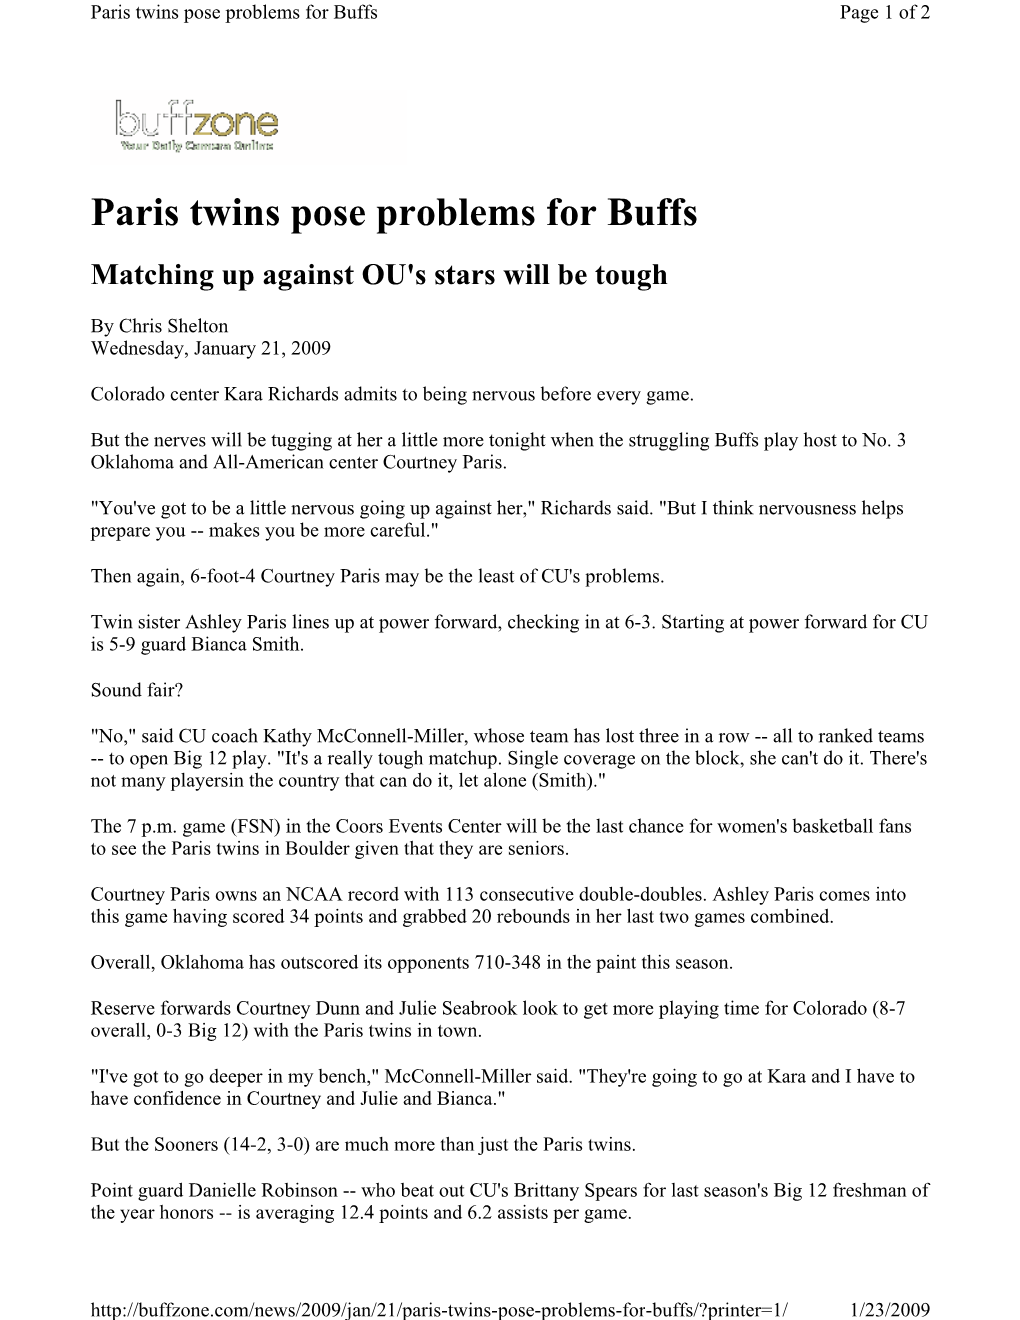 Paris Twins Pose Problems for Buffs Page 1 of 2